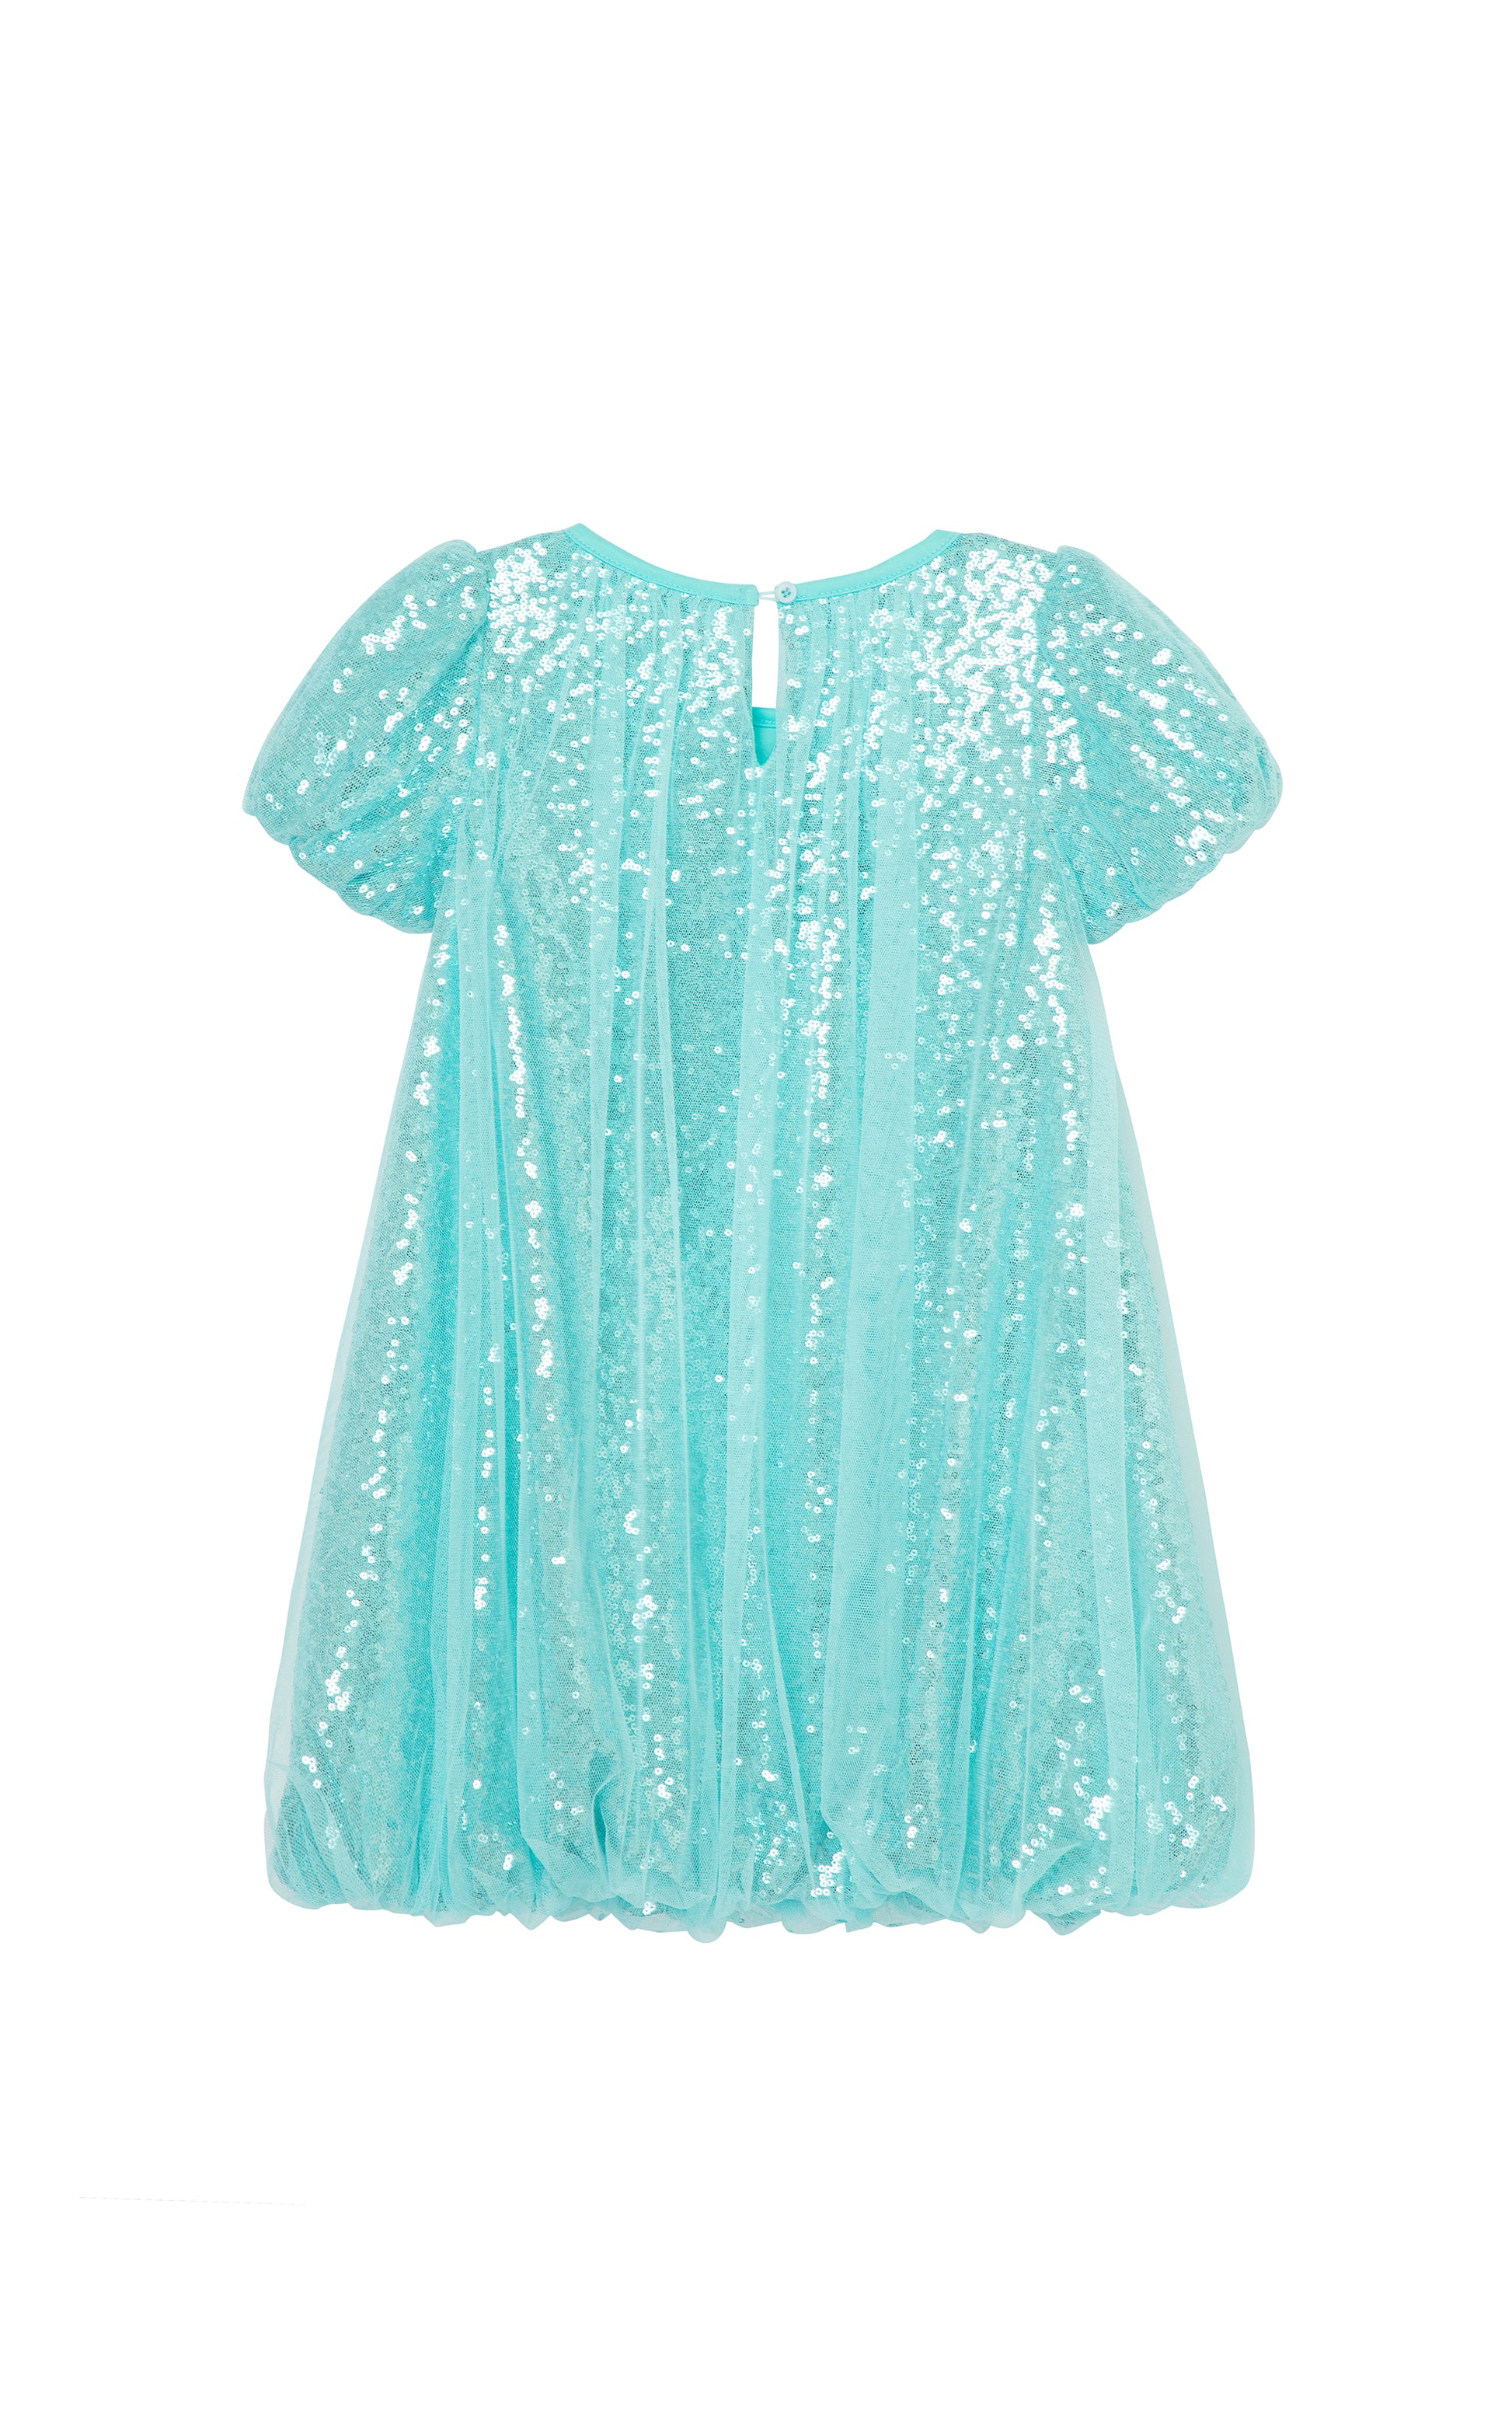 Back view of light blue sequin dress with bubble hem